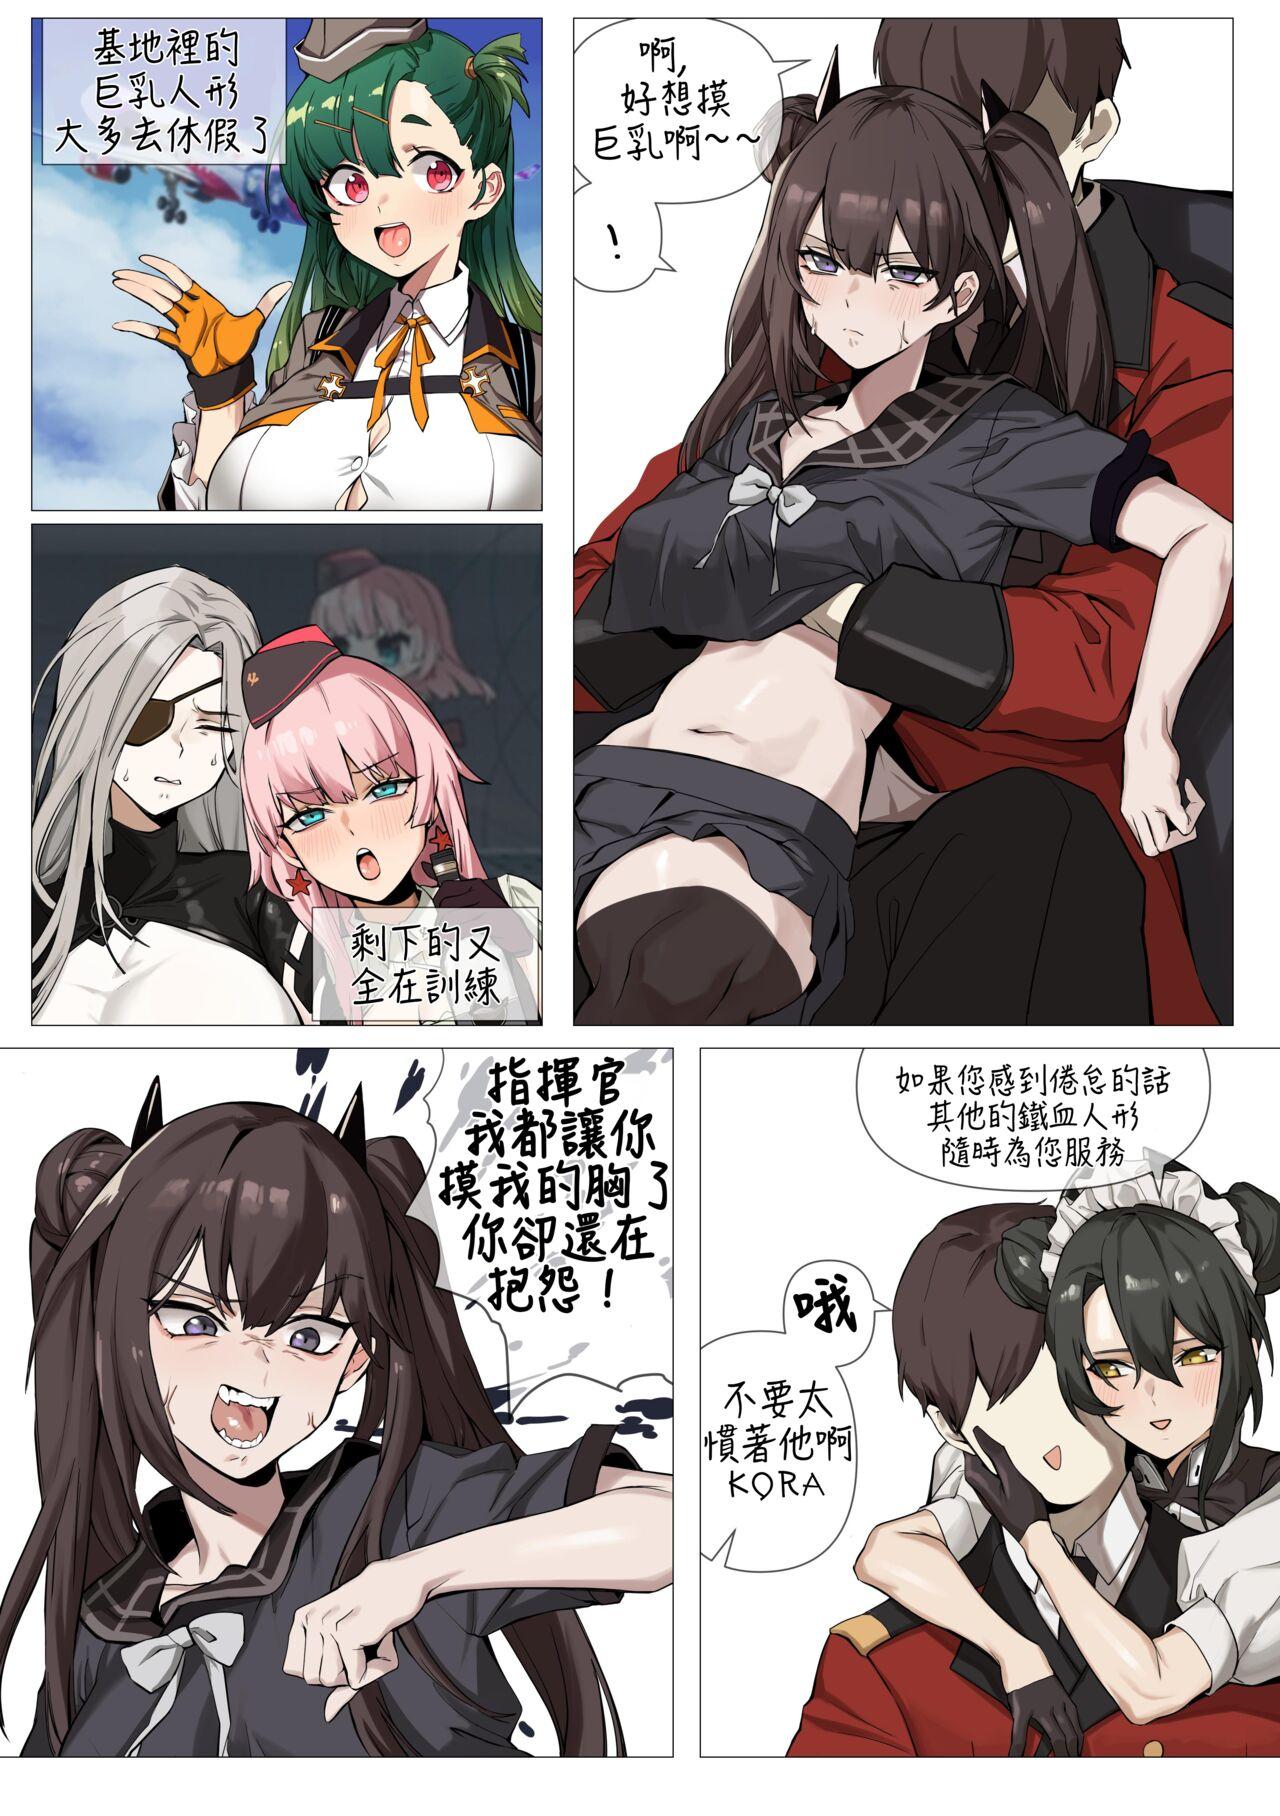 Real Amature Porn DP-12 - Girls frontline Sucking Dick - Page 2